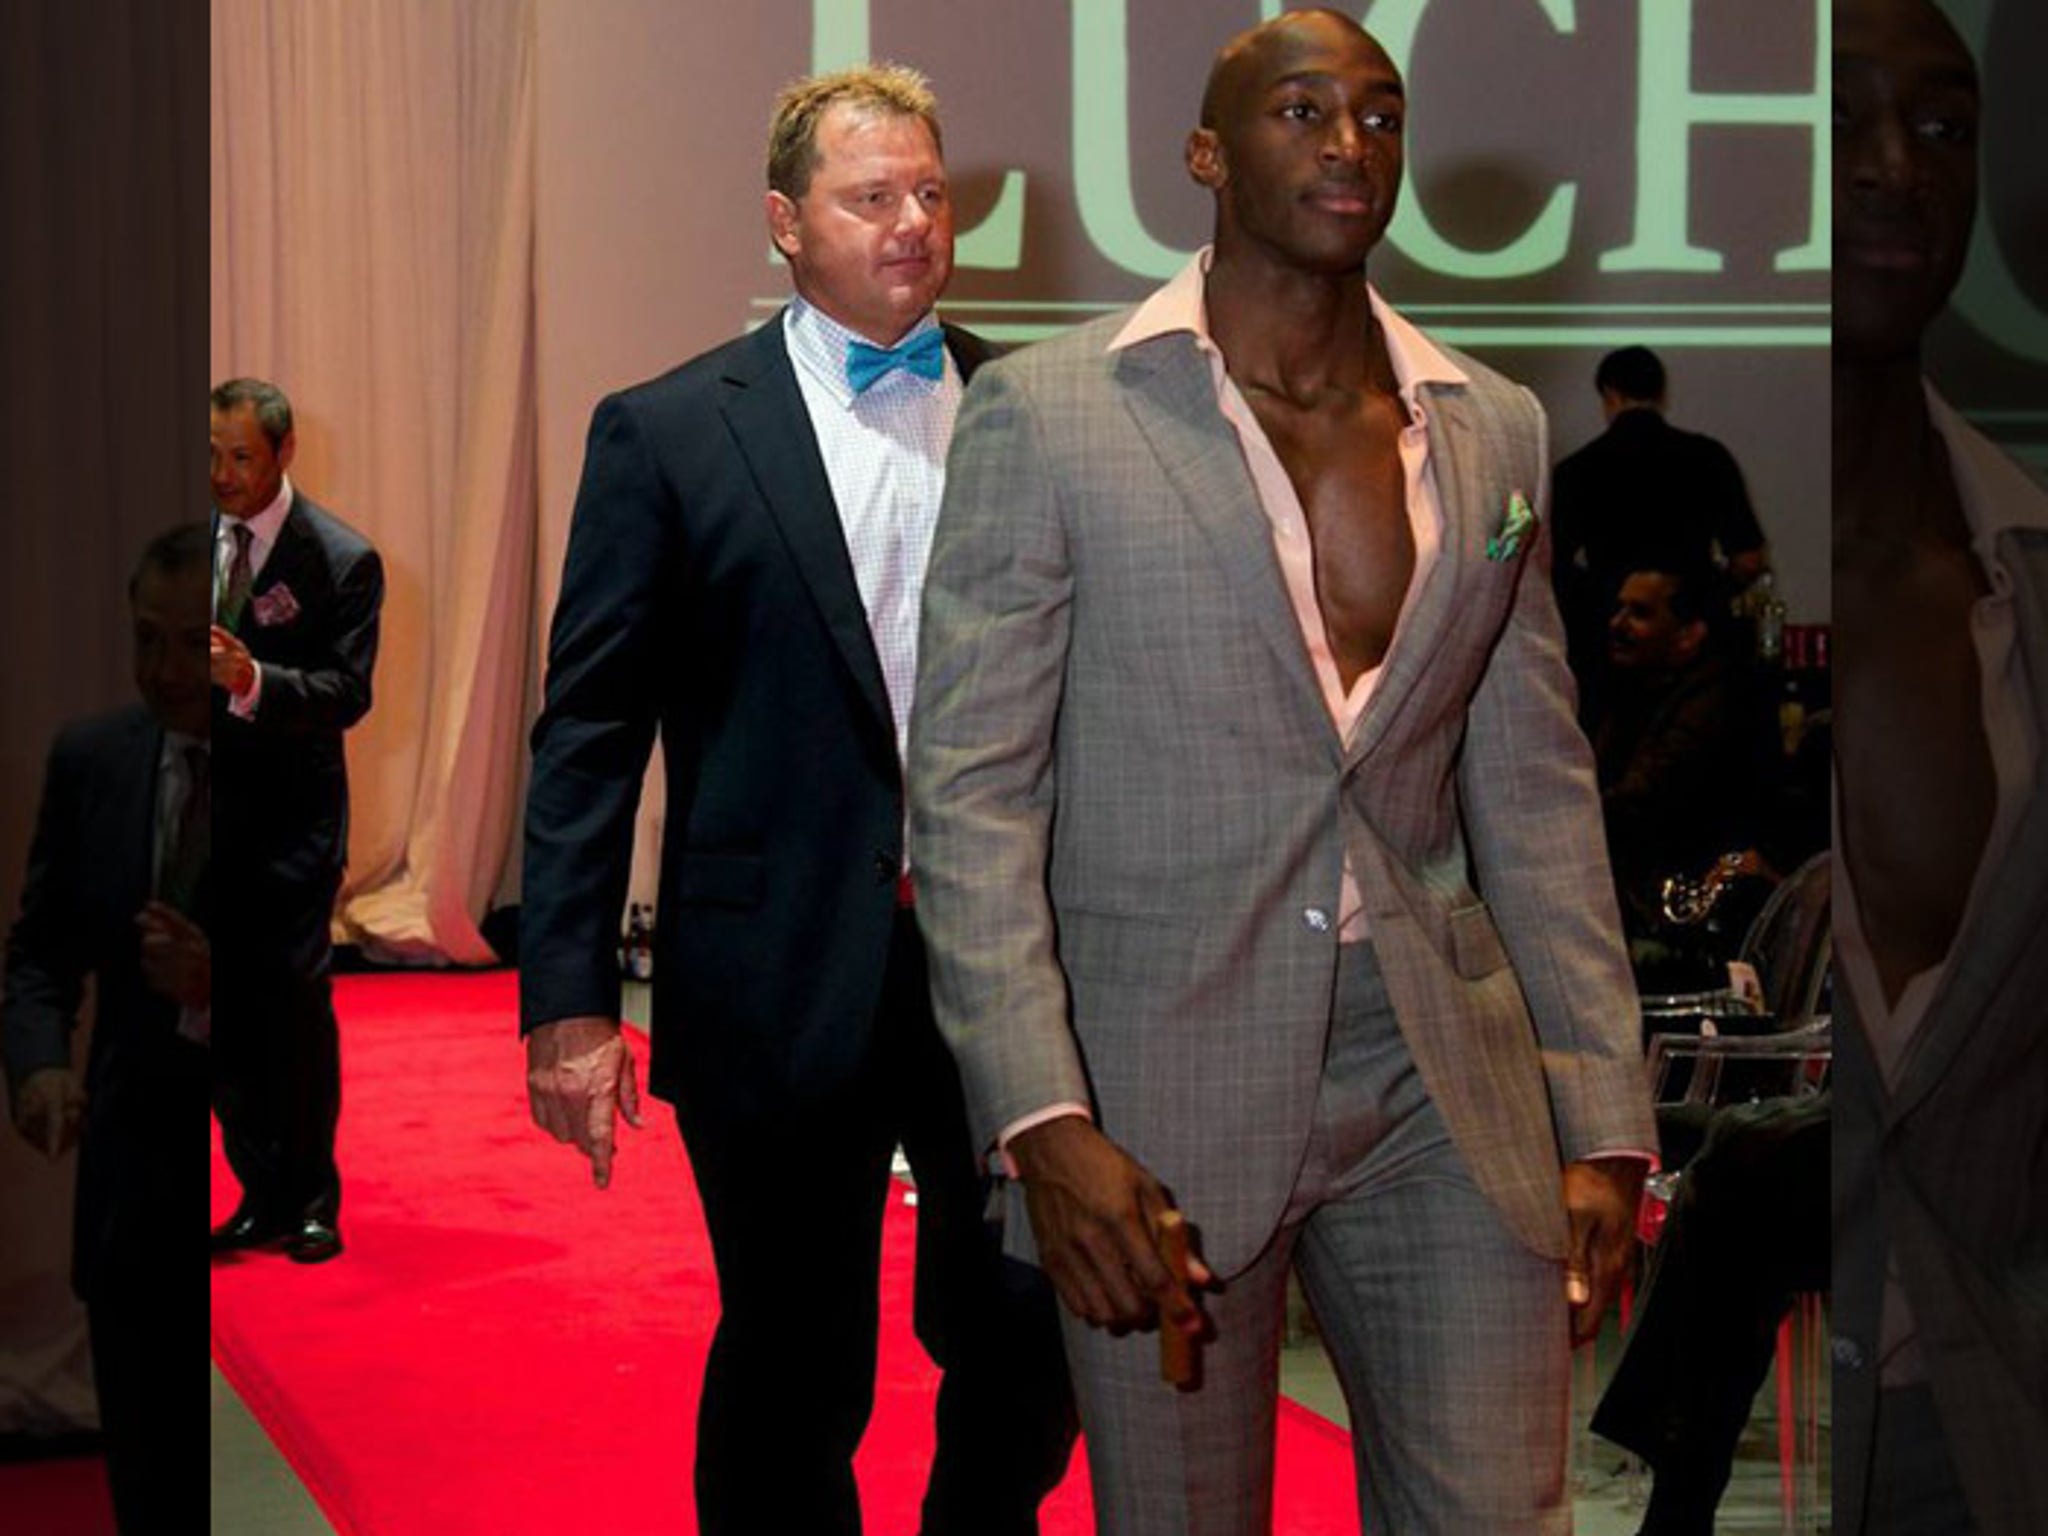 Week in Fashion: The Houston Rockets Make a Red-Carpet Promise